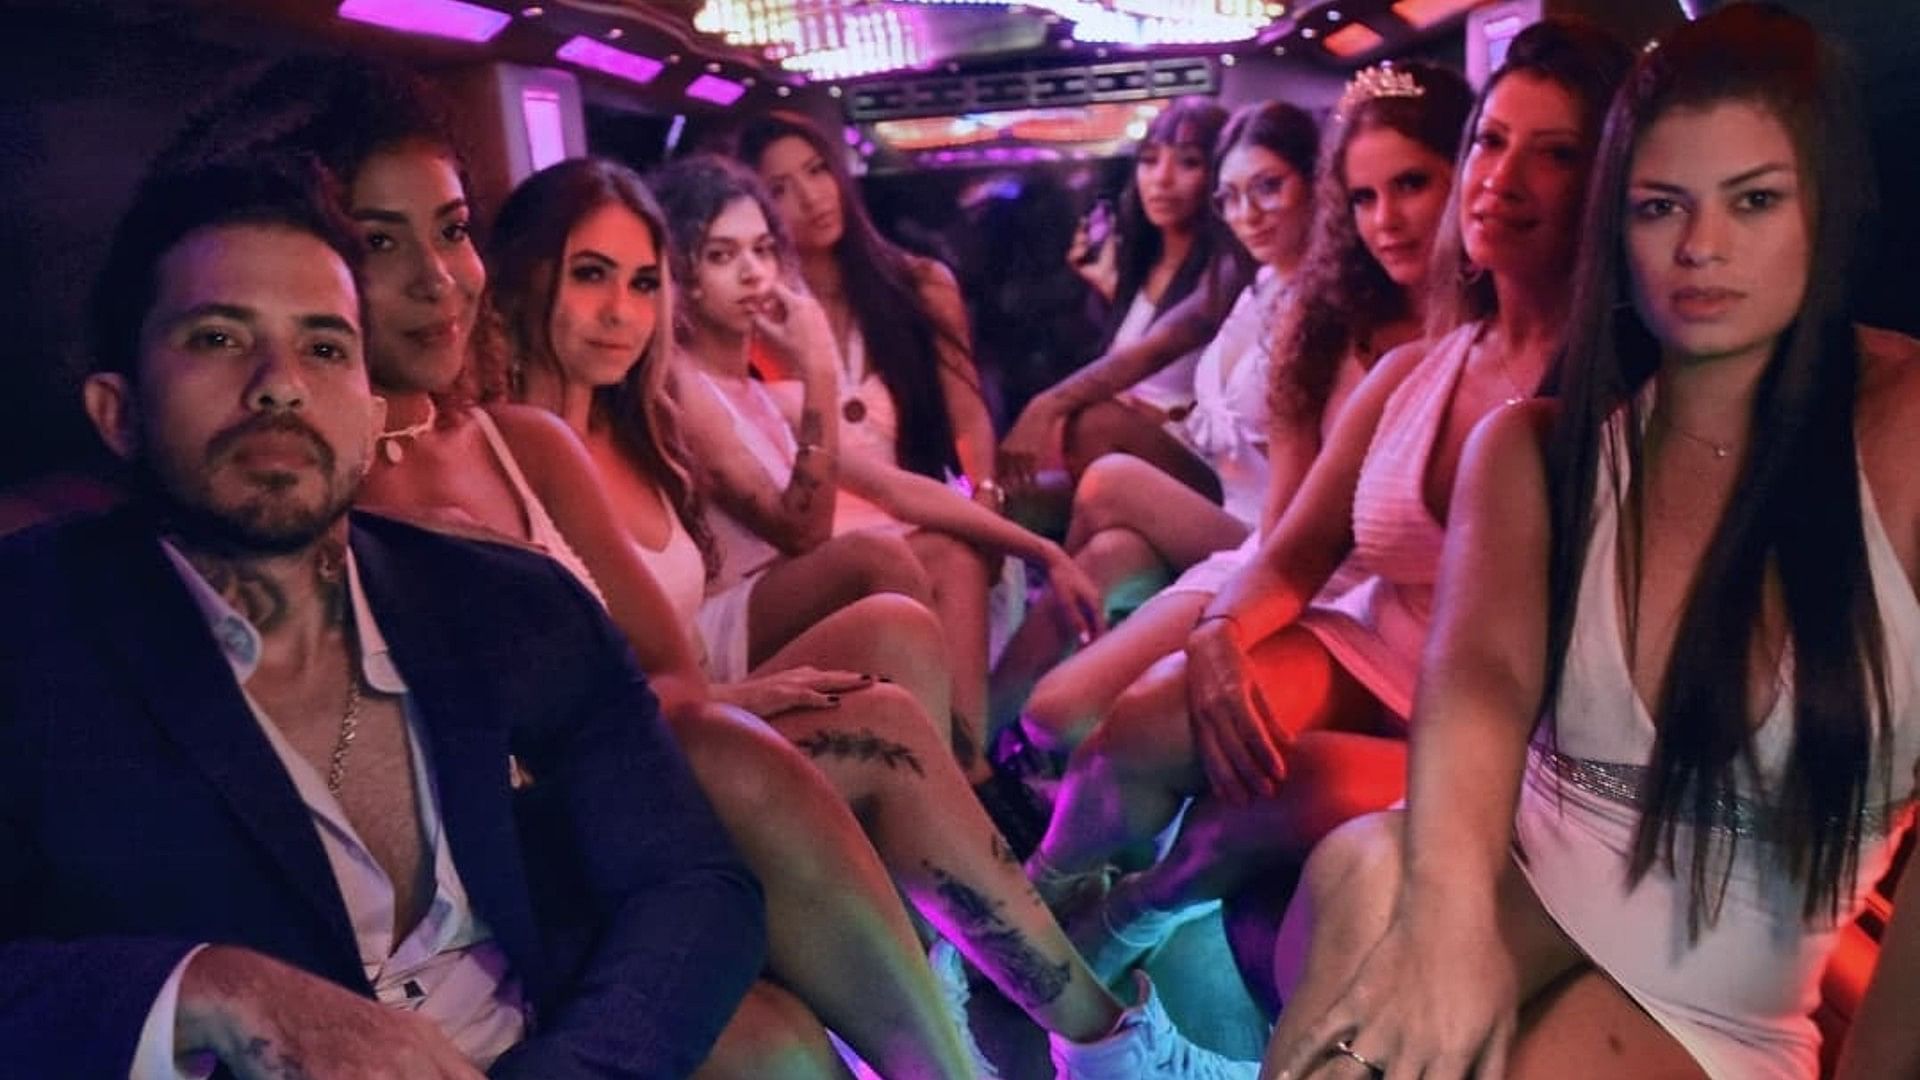 model with nine wives now planning for kids started a new roster